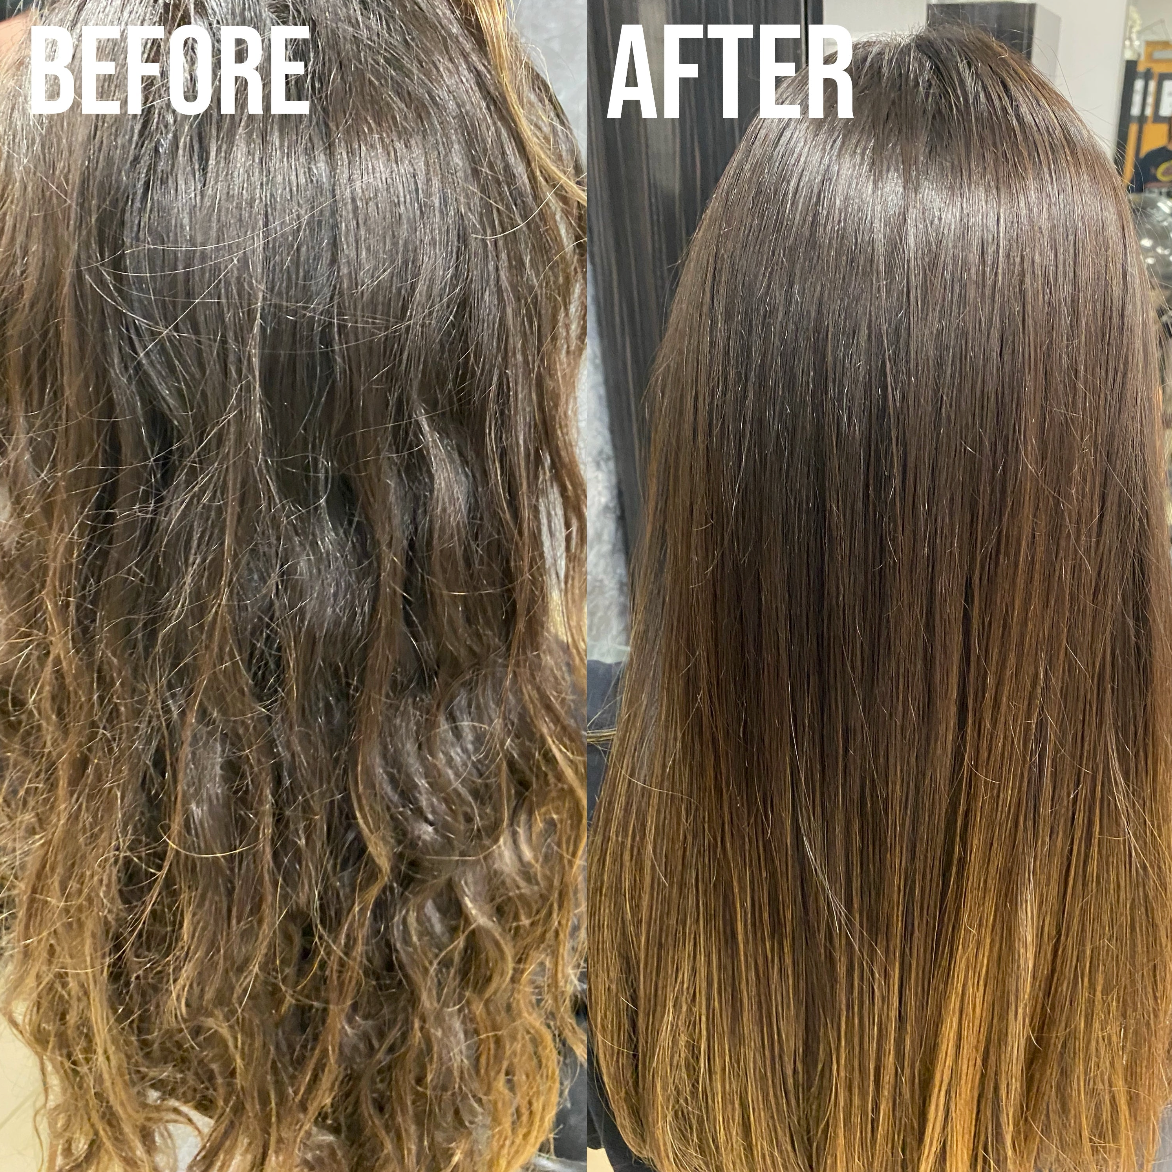 Vegan Smoothing Keratin Hair Treatment- Professional Brazilian Complex Blowout Straightening For Silky Smooth & Frizz Free Hair - Formaldehyde Free